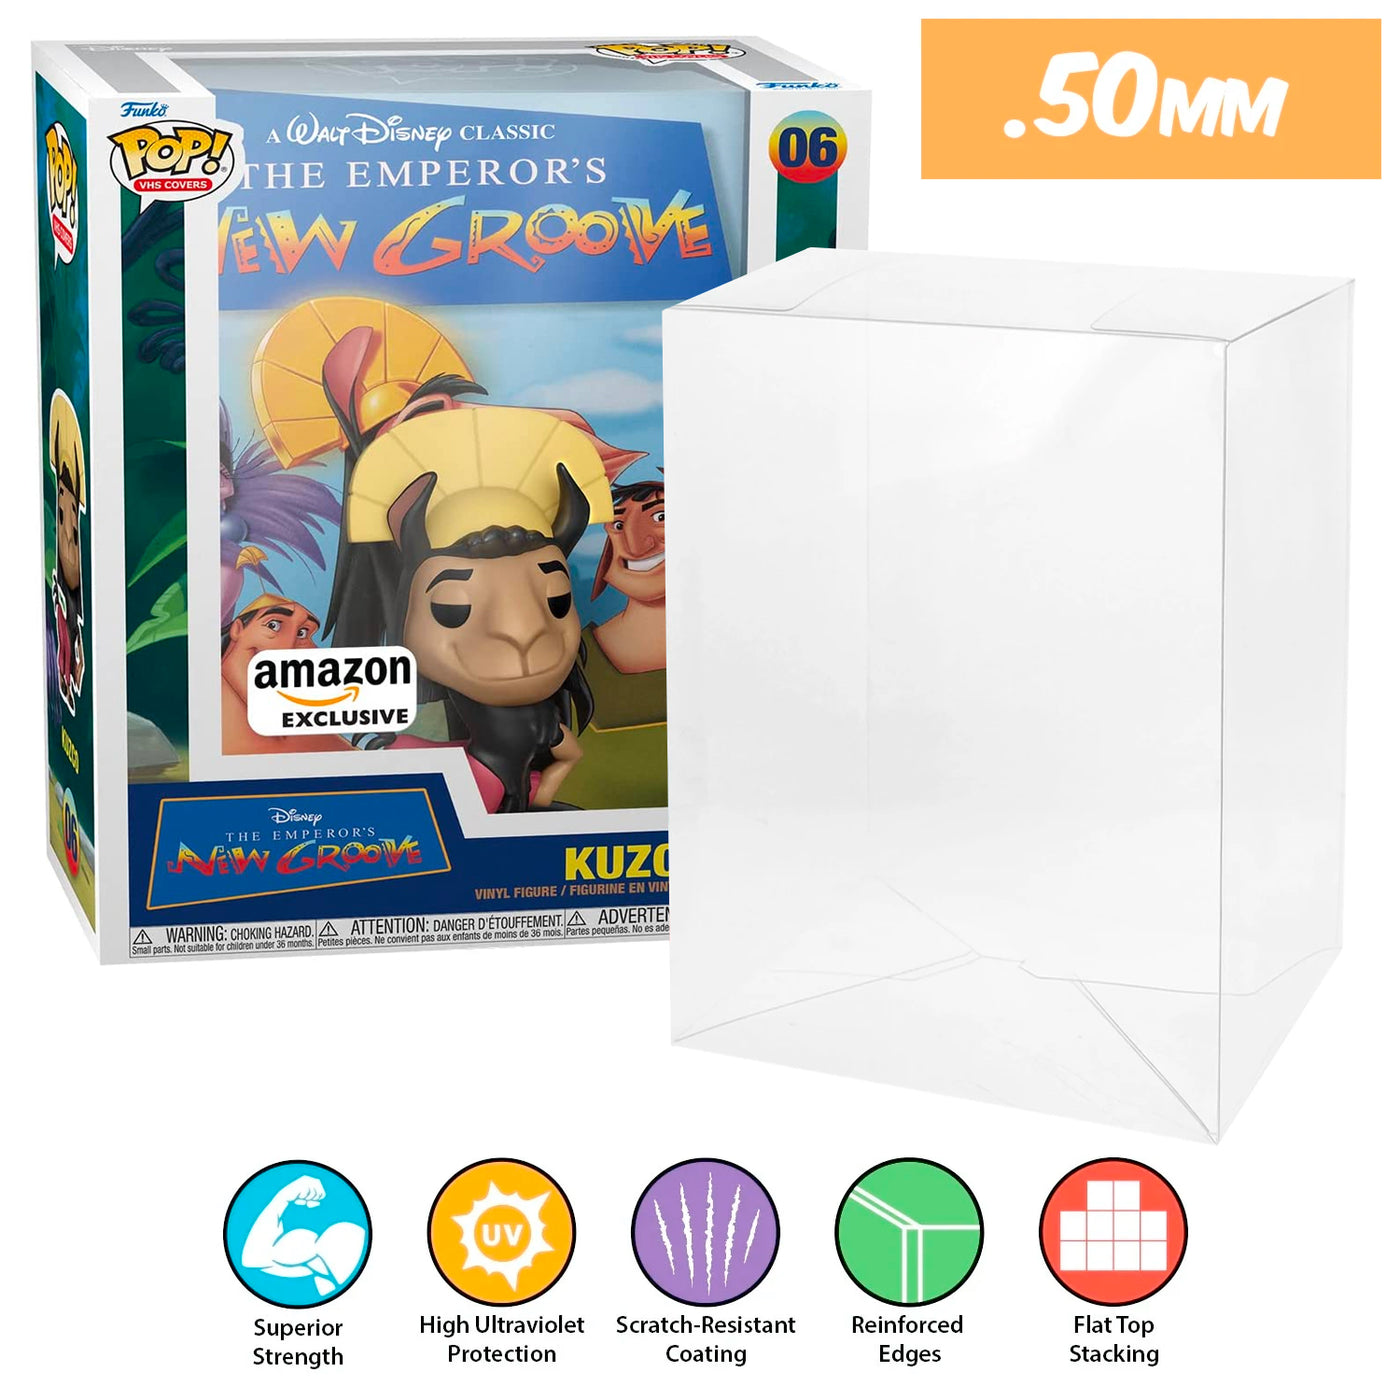 06 kuzco emperors new groove amazon pop vhs covers best funko pop protectors thick strong uv scratch flat top stack vinyl display geek plastic shield vaulted eco armor fits collect protect display case kollector protector